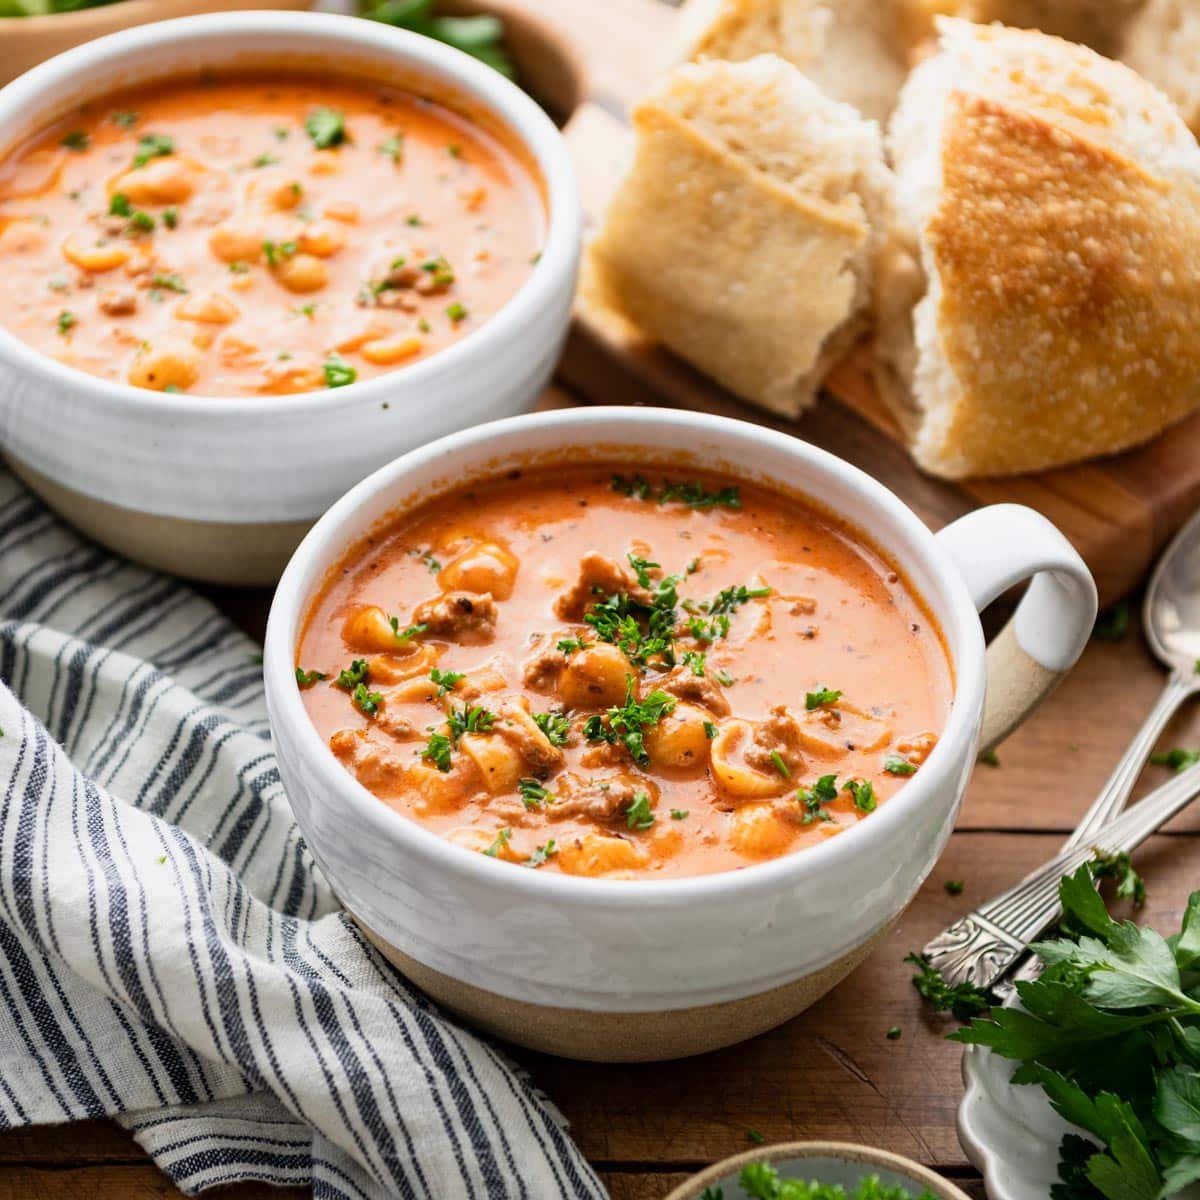 Square side shot of two bowls of creamy tomato soup with ground beef and noodles on a table with bread and salad.